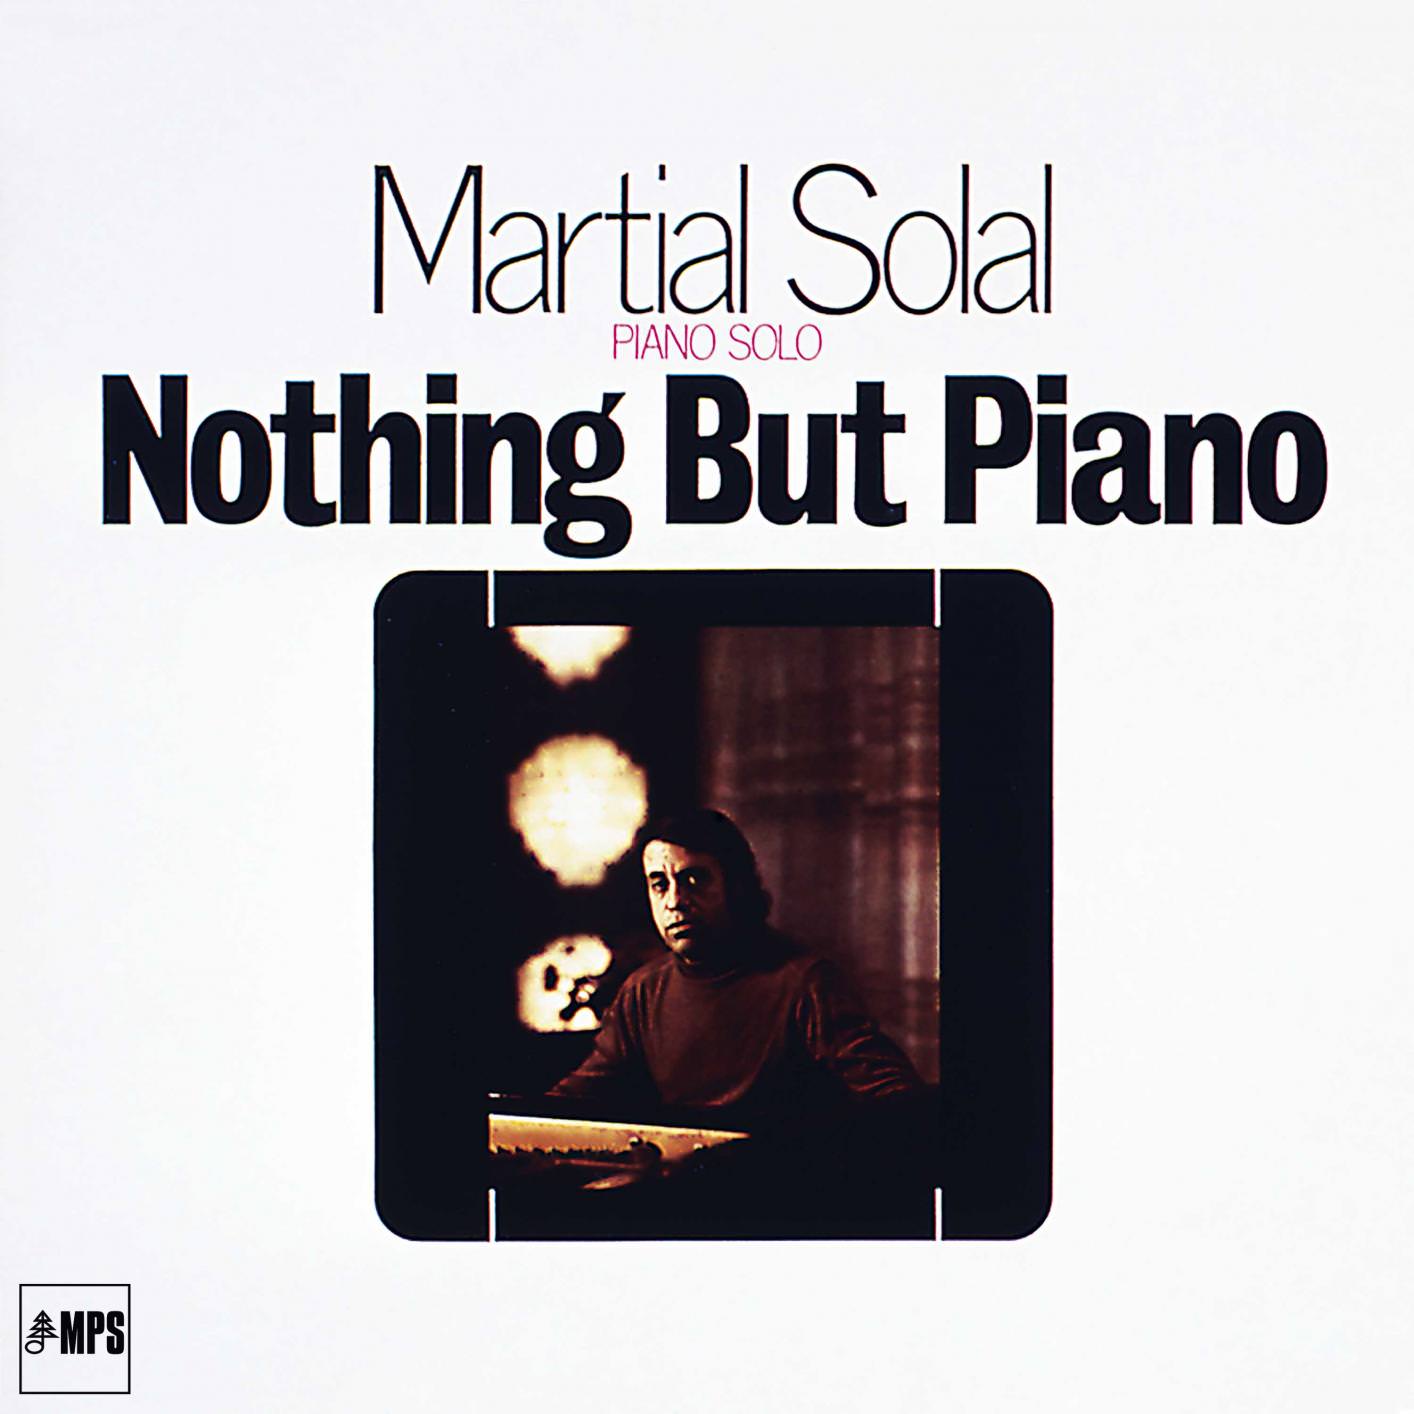 Martial Solal - Nothing But Piano (1976/2016) [HighResAudio FLAC 24bit/88,2kHz]